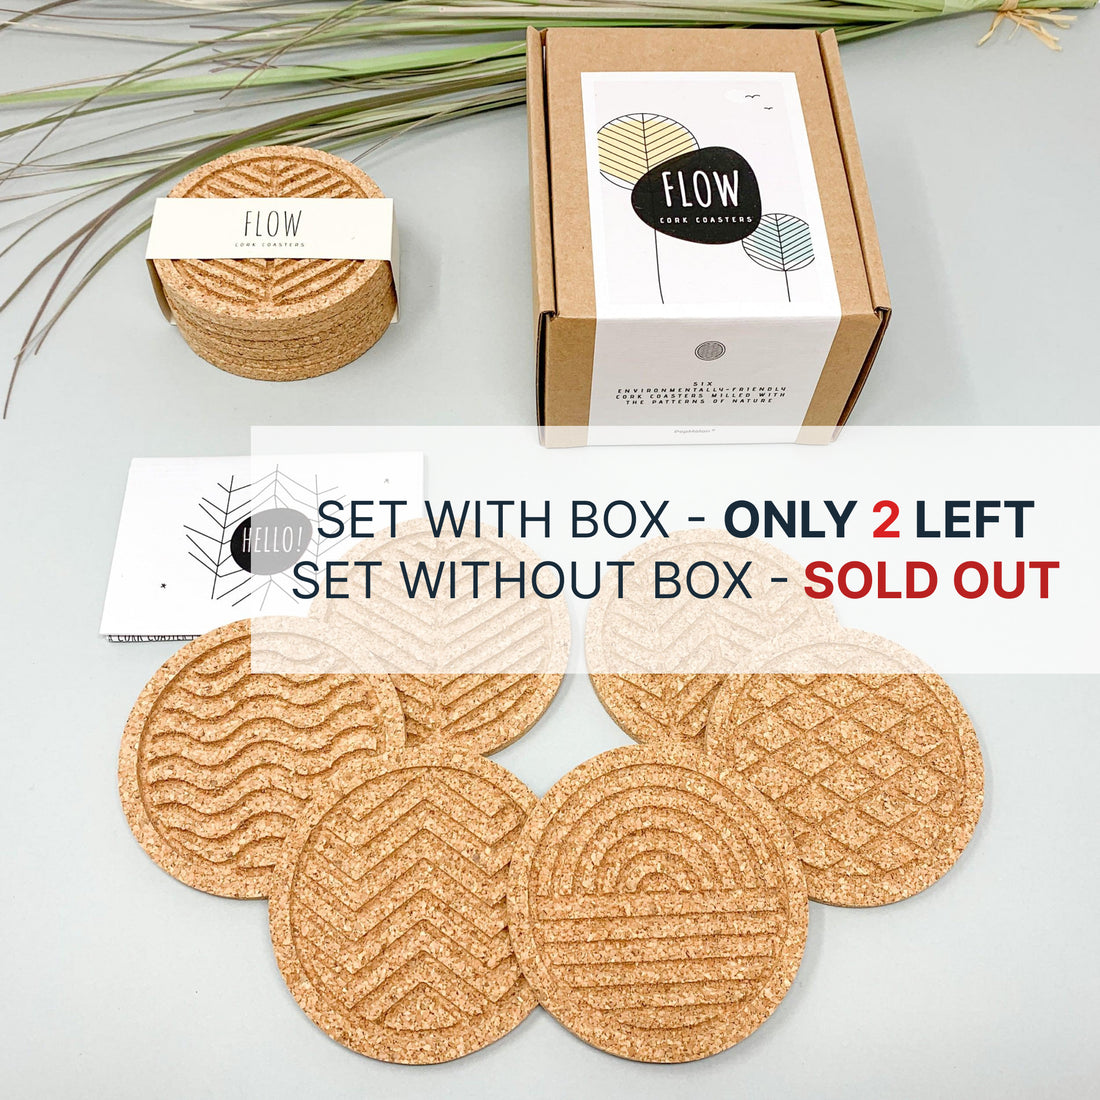 💥 End-of-Sale Alert! 💥 The final few pieces of our much-loved Cork Coaster Sets